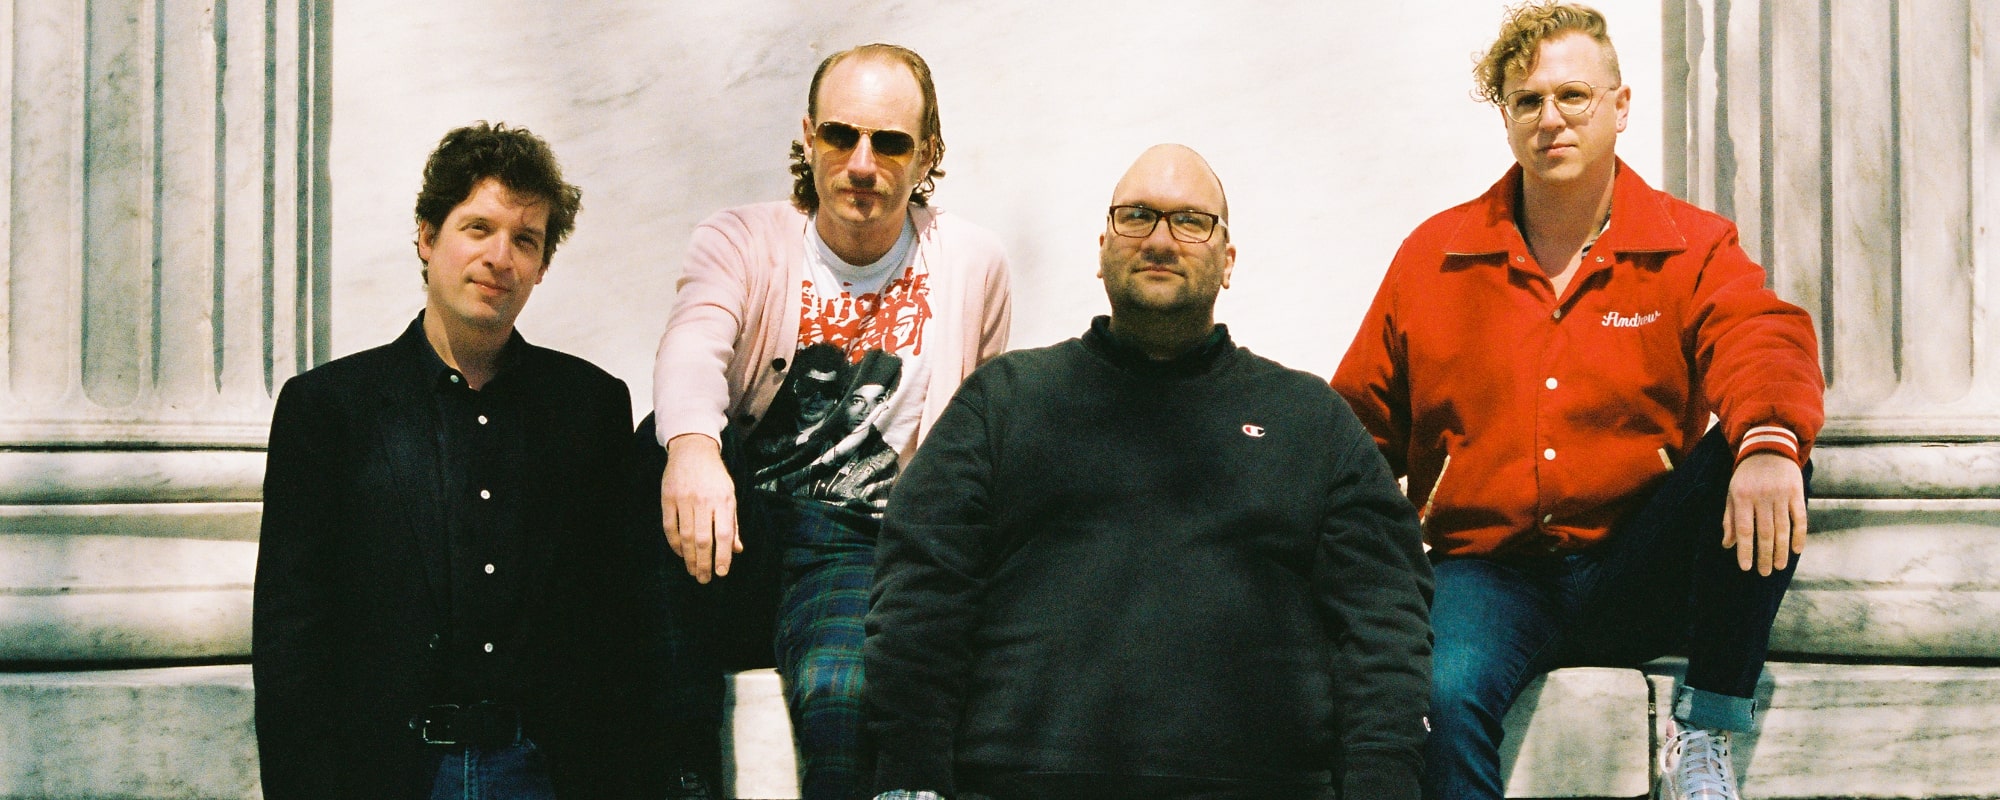 Deer Tick Releases Hard-Driving Cover of Bruce Springsteen’s 1984 Hit “Dancing in the Dark” Ahead of Fall Tour